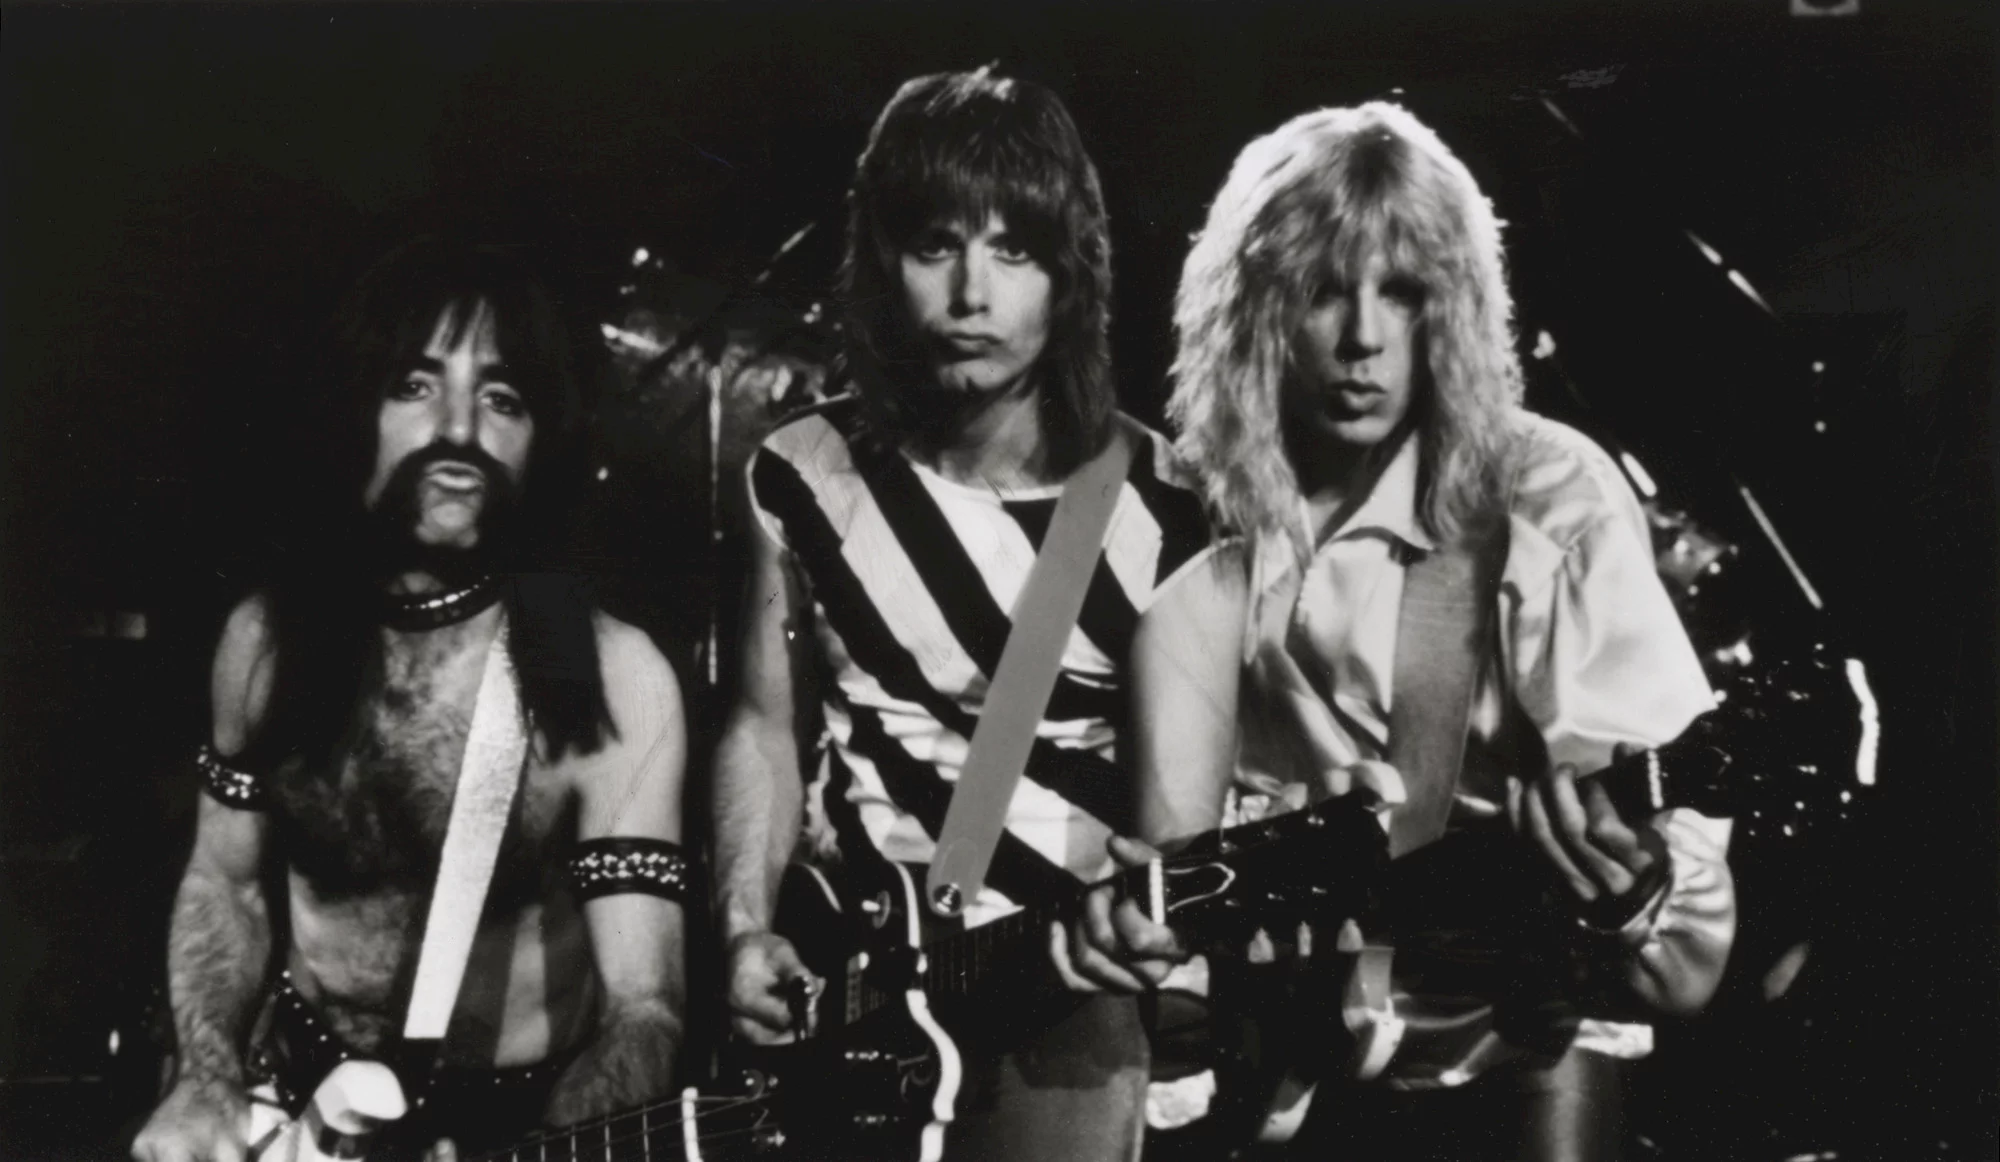 Photo du film : This is spinal tap